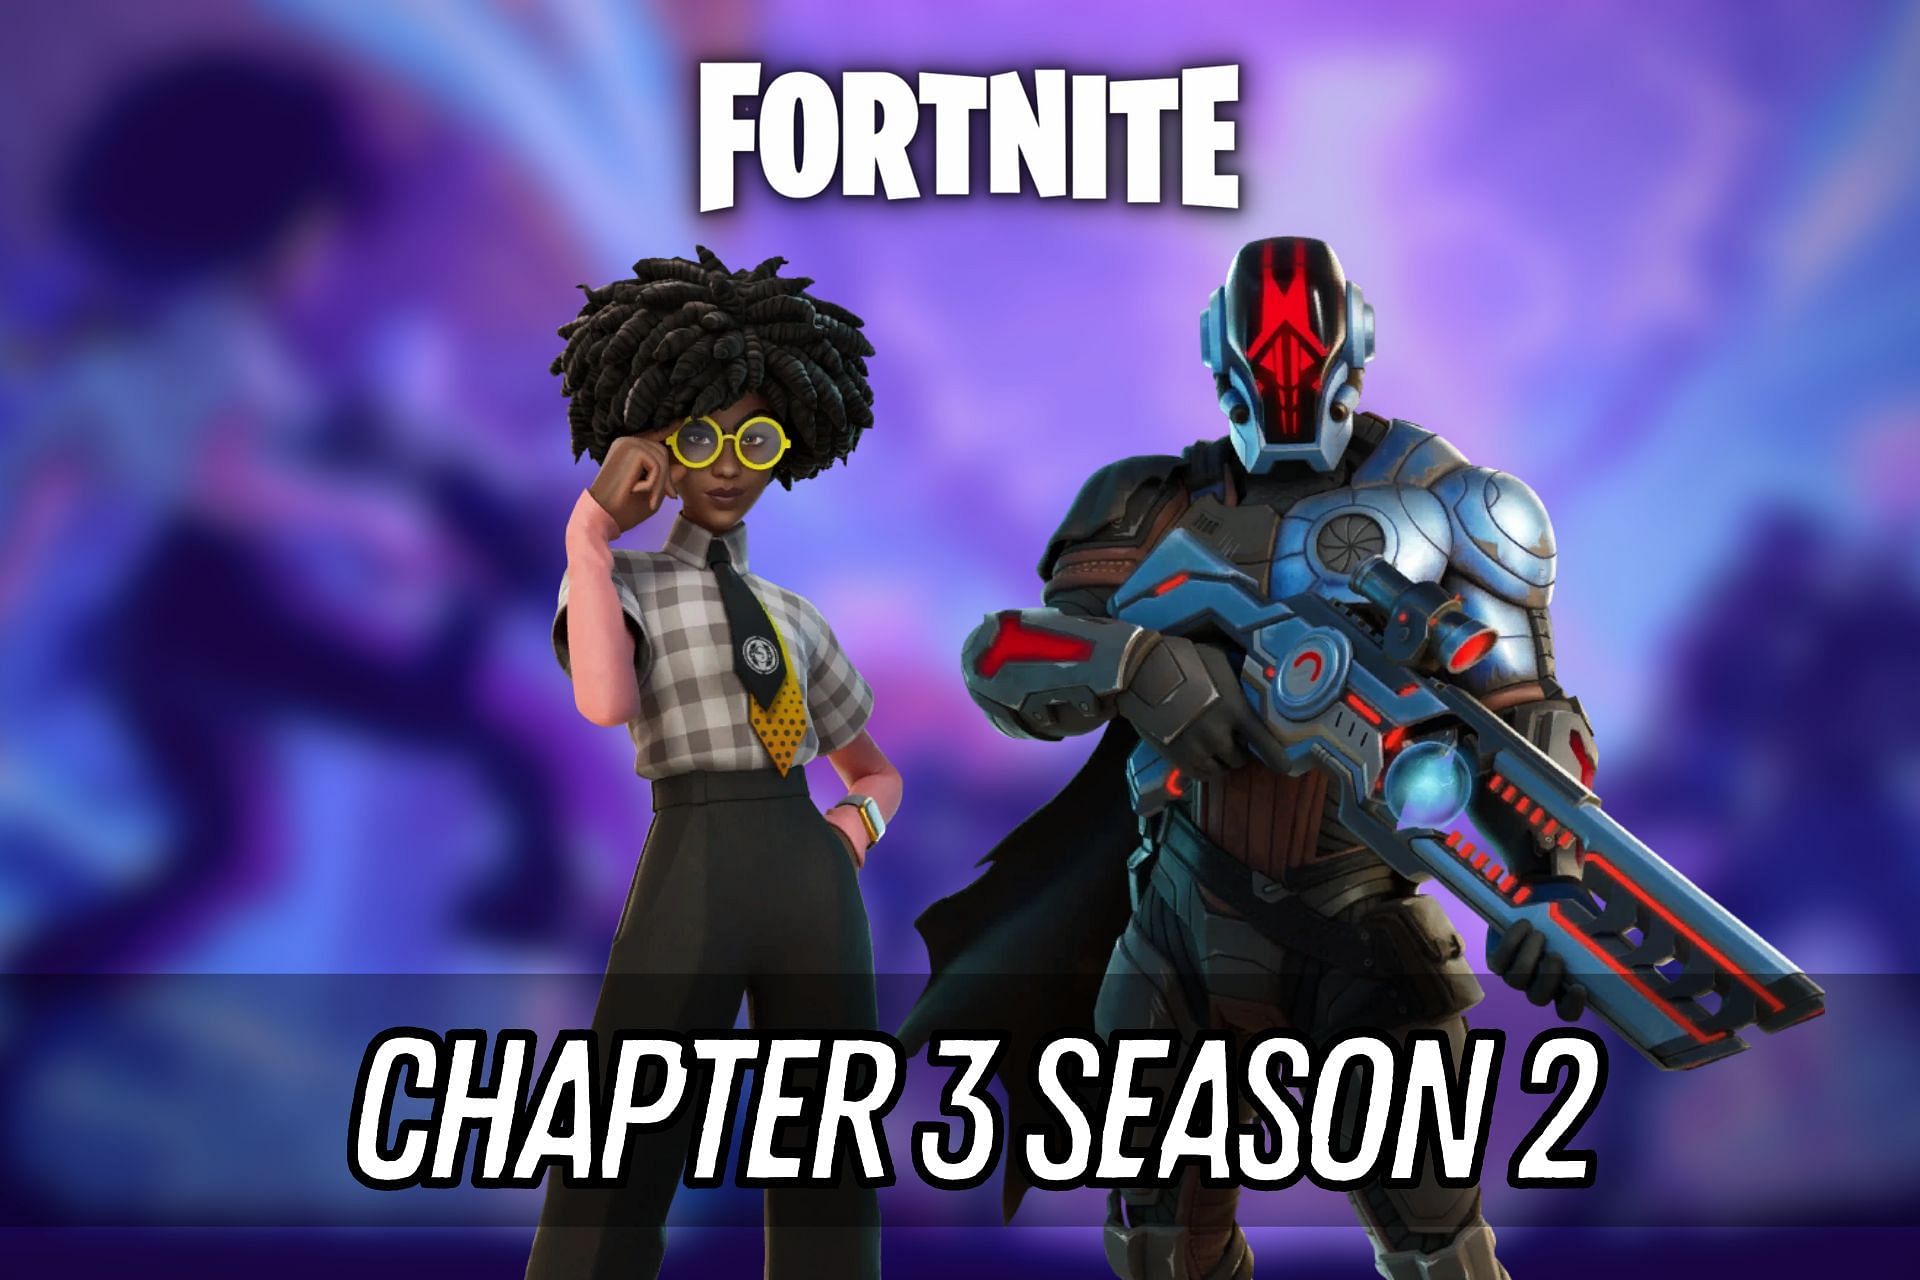 Fortnite Chapter 3 Season 2 leaks are out, and loopers can find out all that is new and coming to the game next season (Image via Sportskeeda)